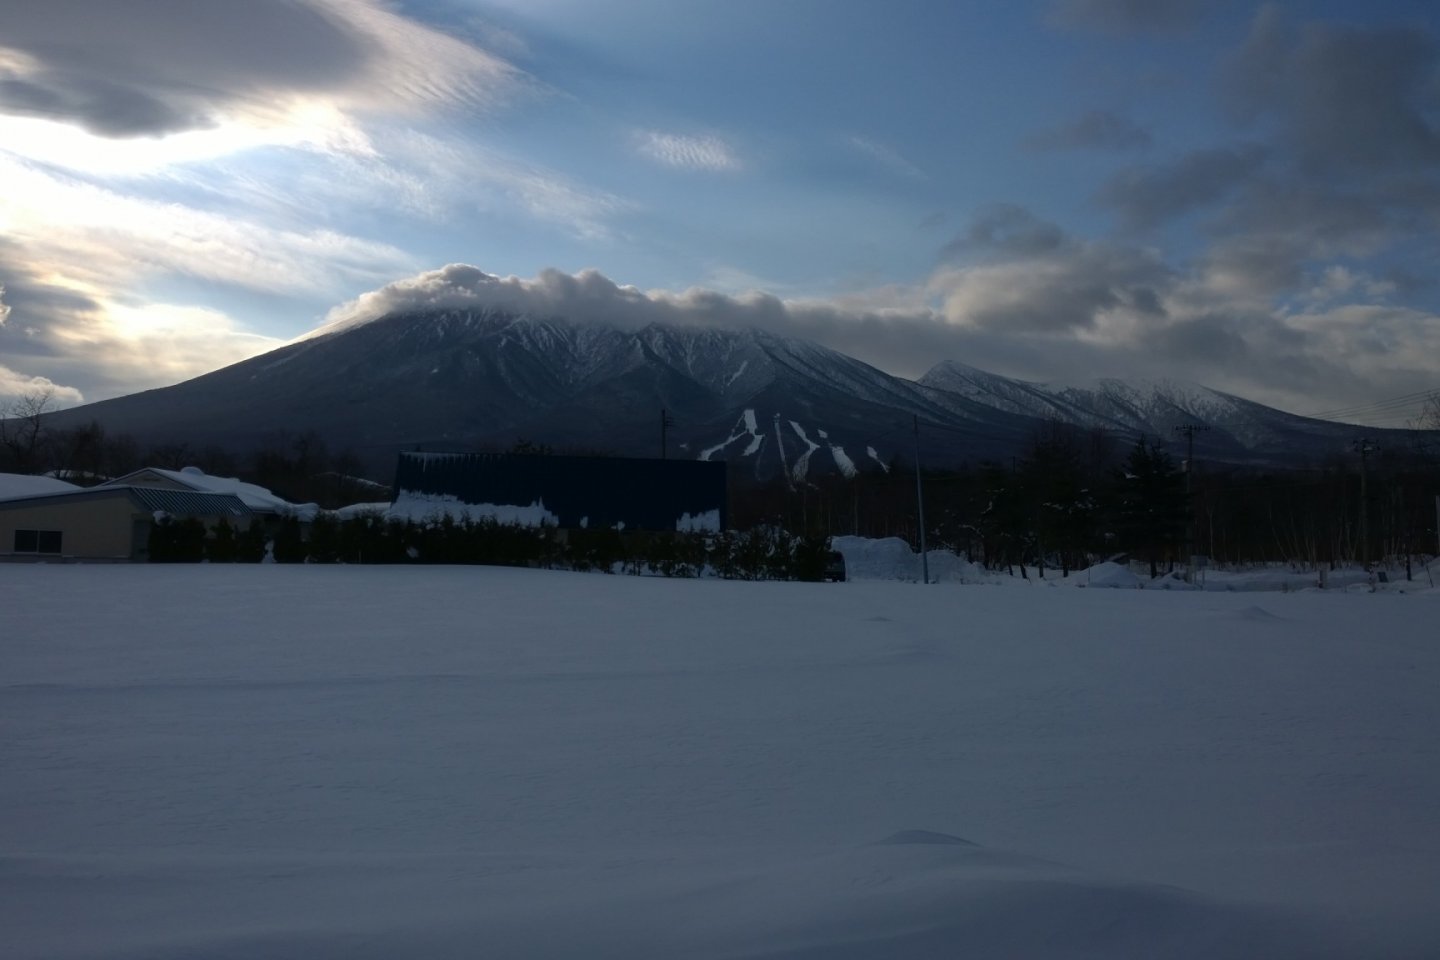 Mount Iwate from the north side